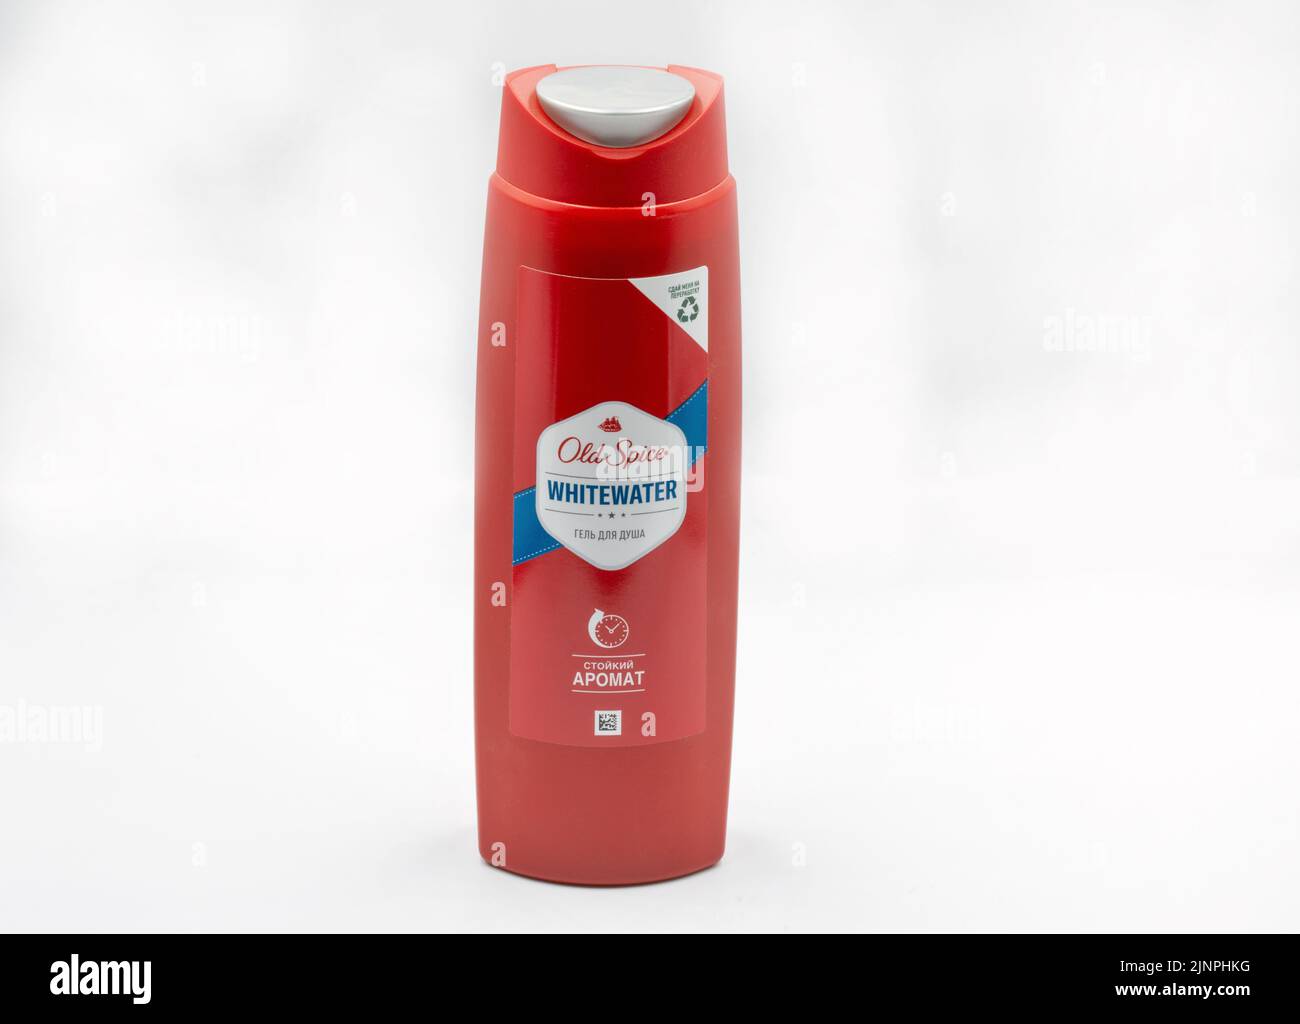 Kyiv, Ukraine - October 31, 2021: Old Spice Whitewater shower gel closeup against white. It is an American brand of male grooming products manufacture Stock Photo